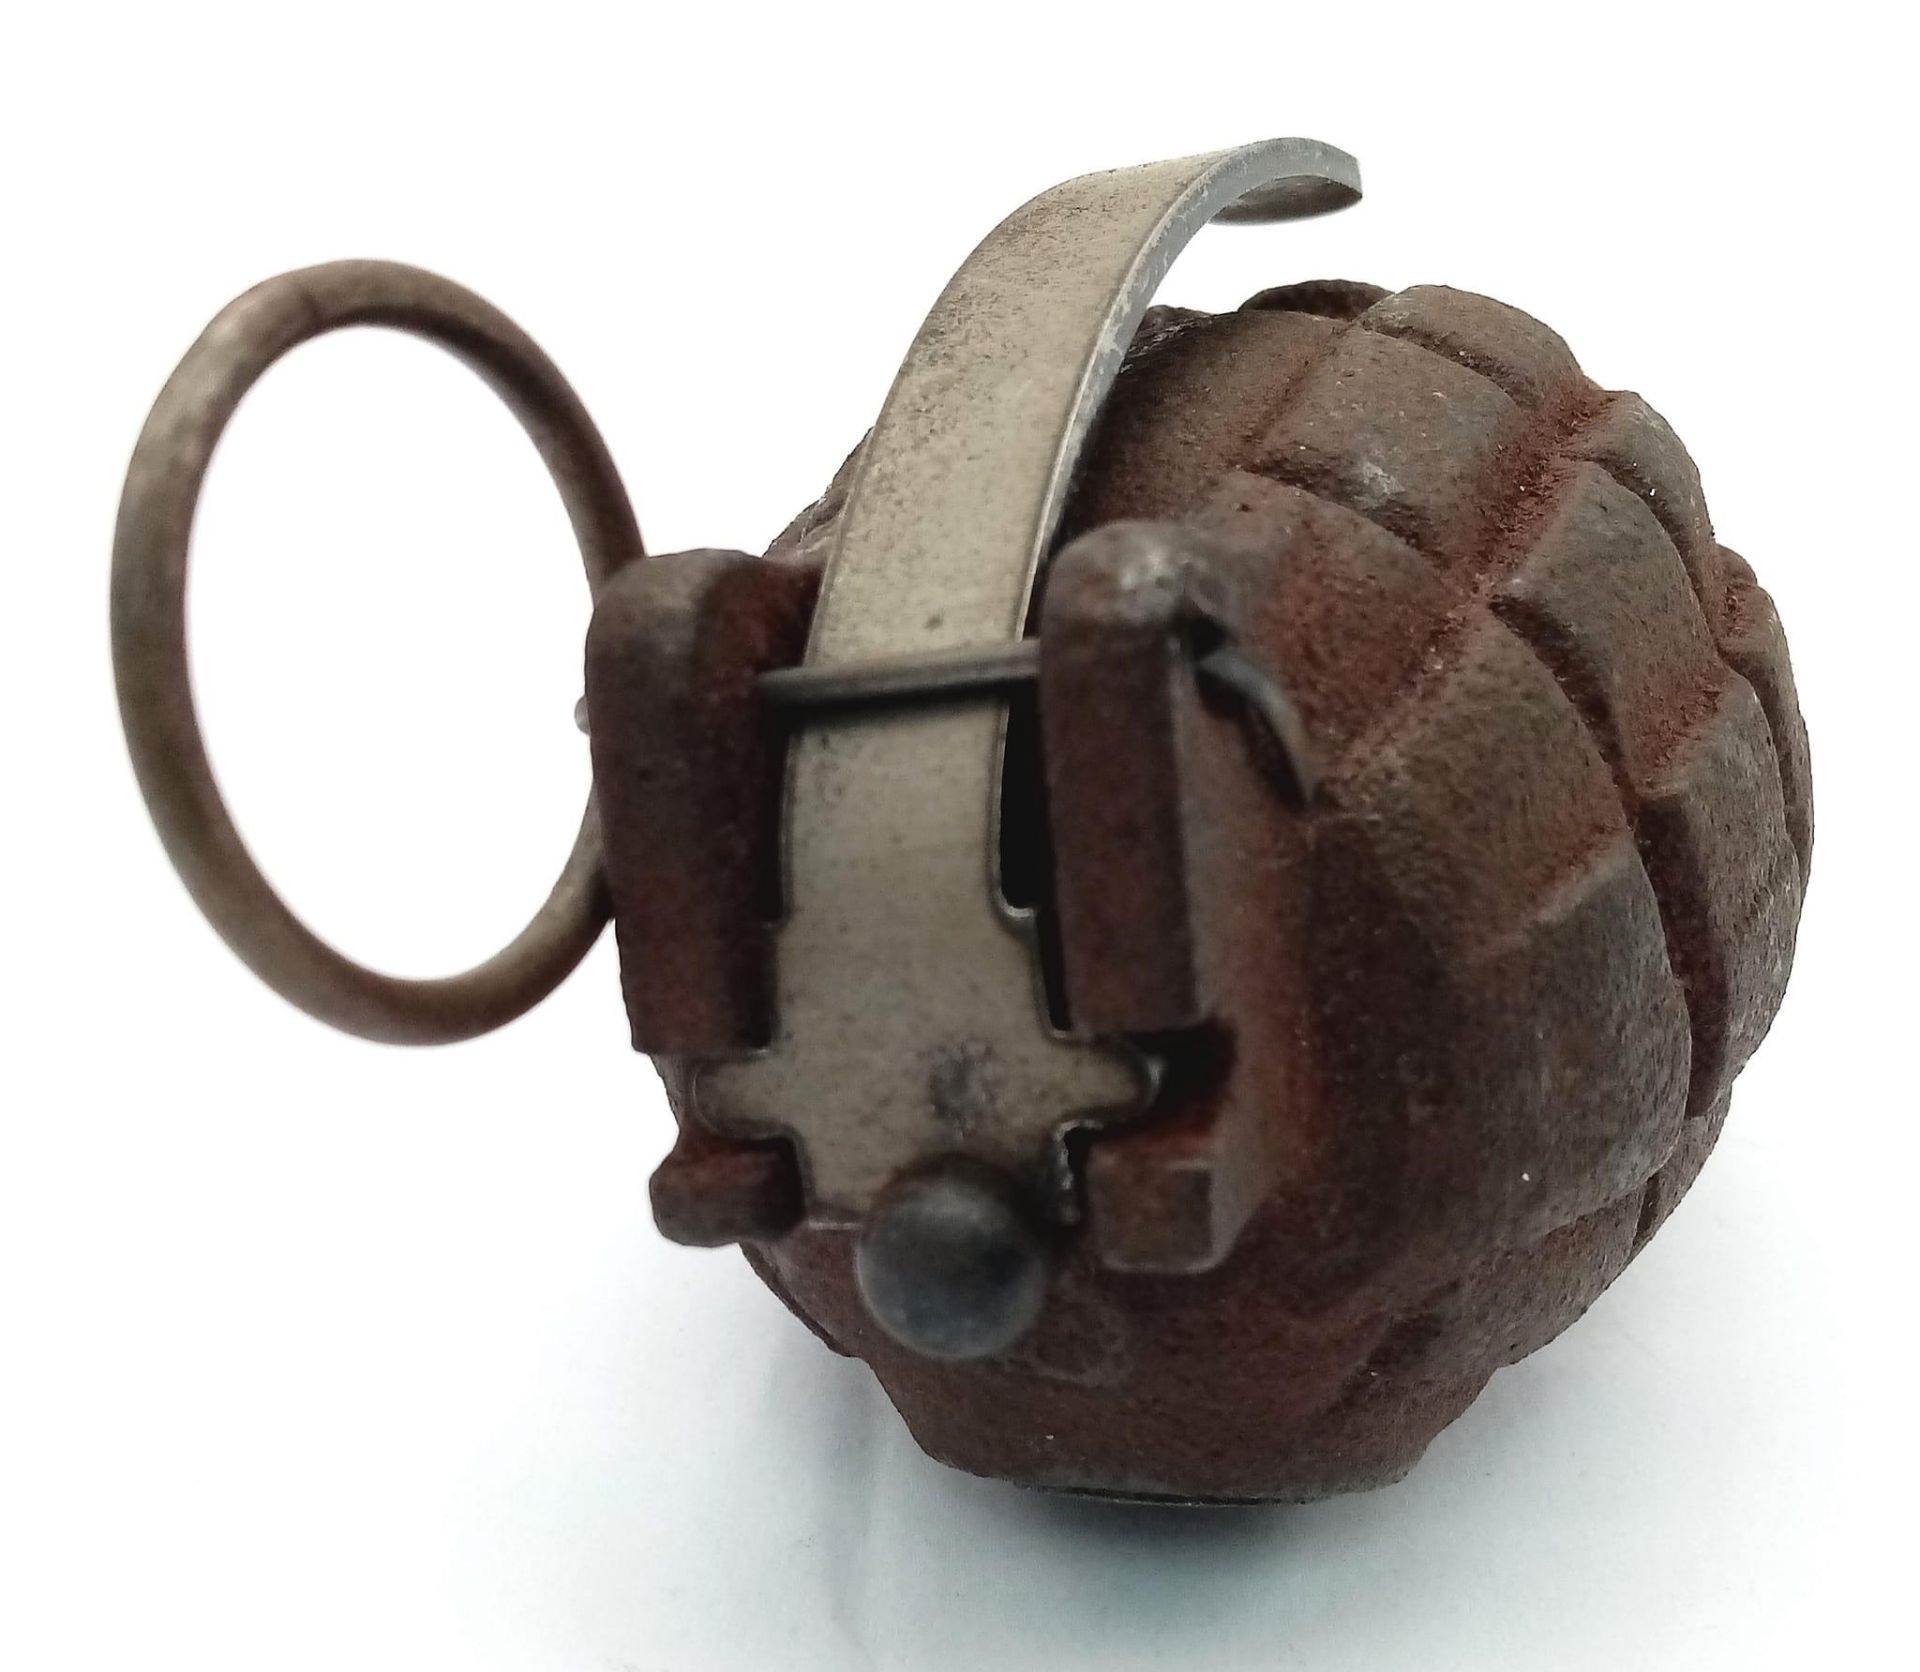 INERT Israeli No 36 Hand Grenade circa late 1940’a-erly 1950’s. UK Mainland Sales Only. - Image 6 of 7